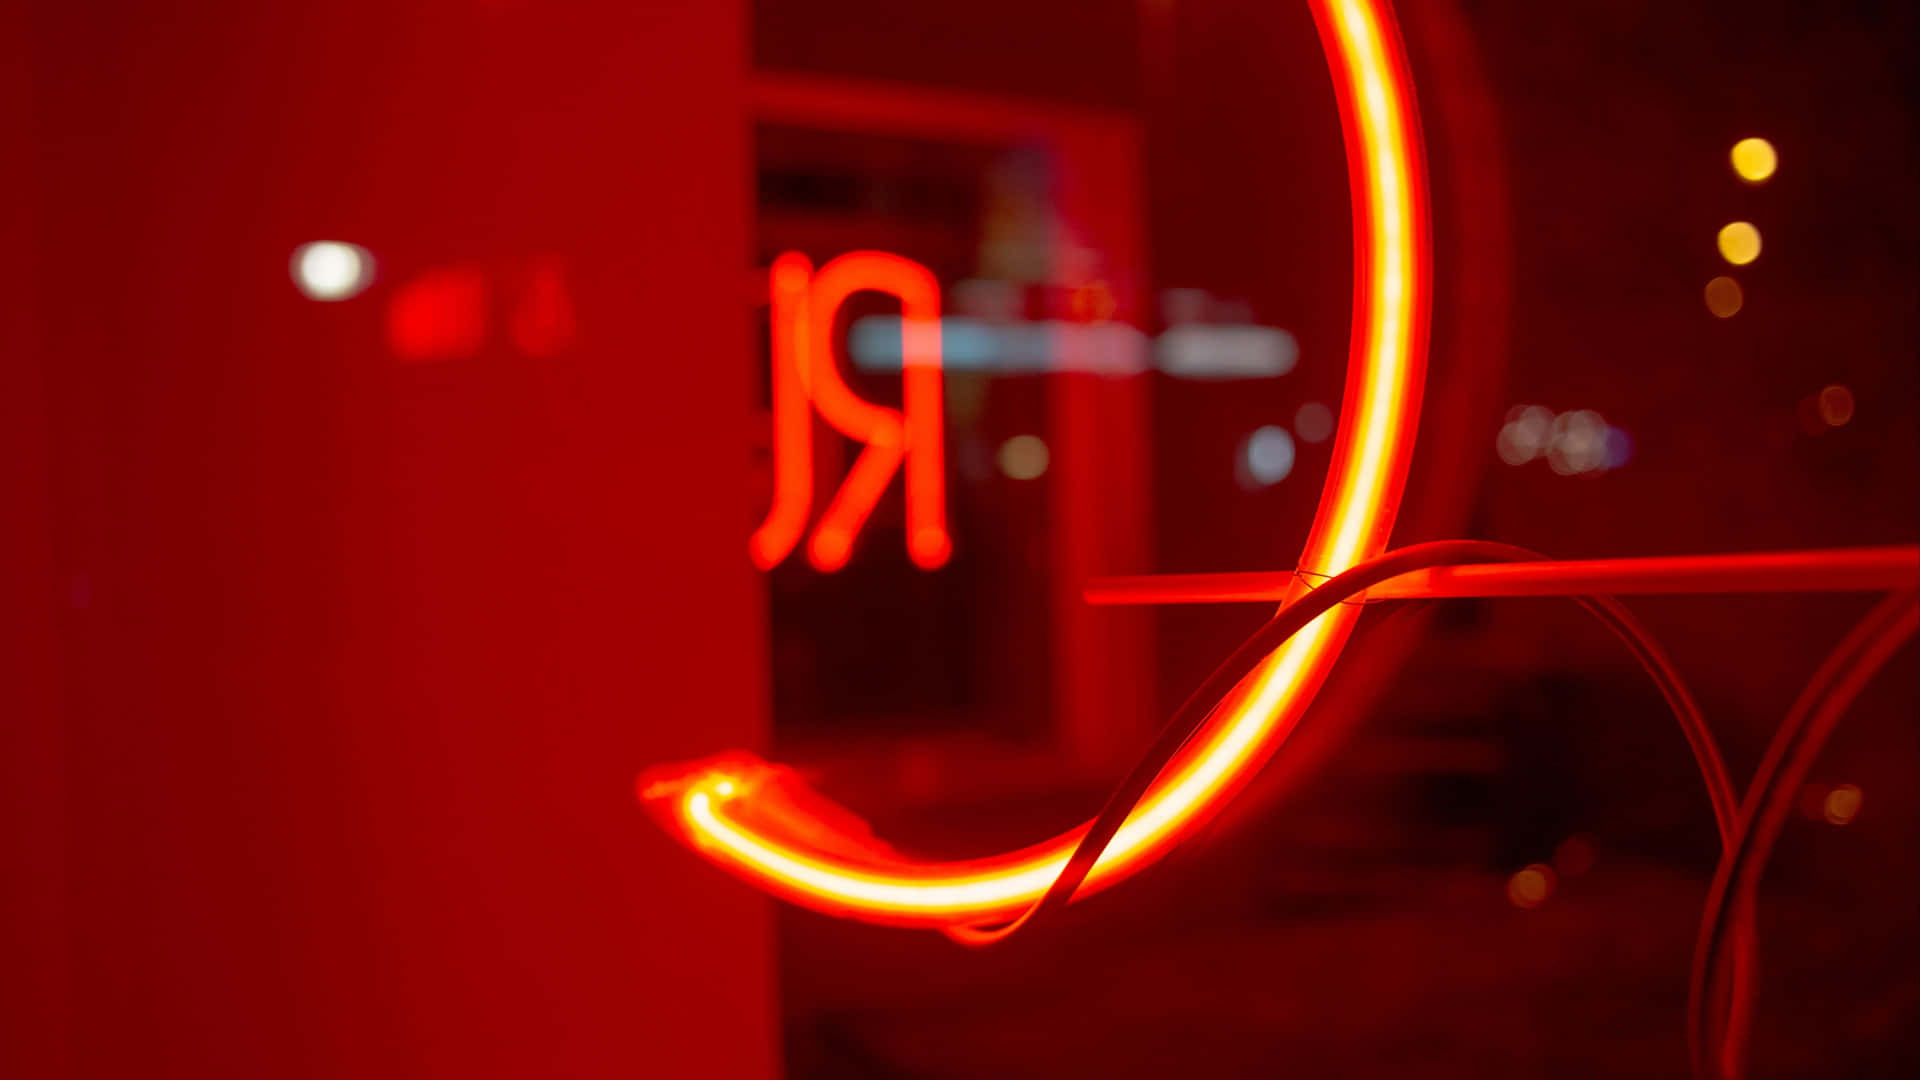 Brighten up your workspace with a bold 4K Red Neon wallpaper Wallpaper